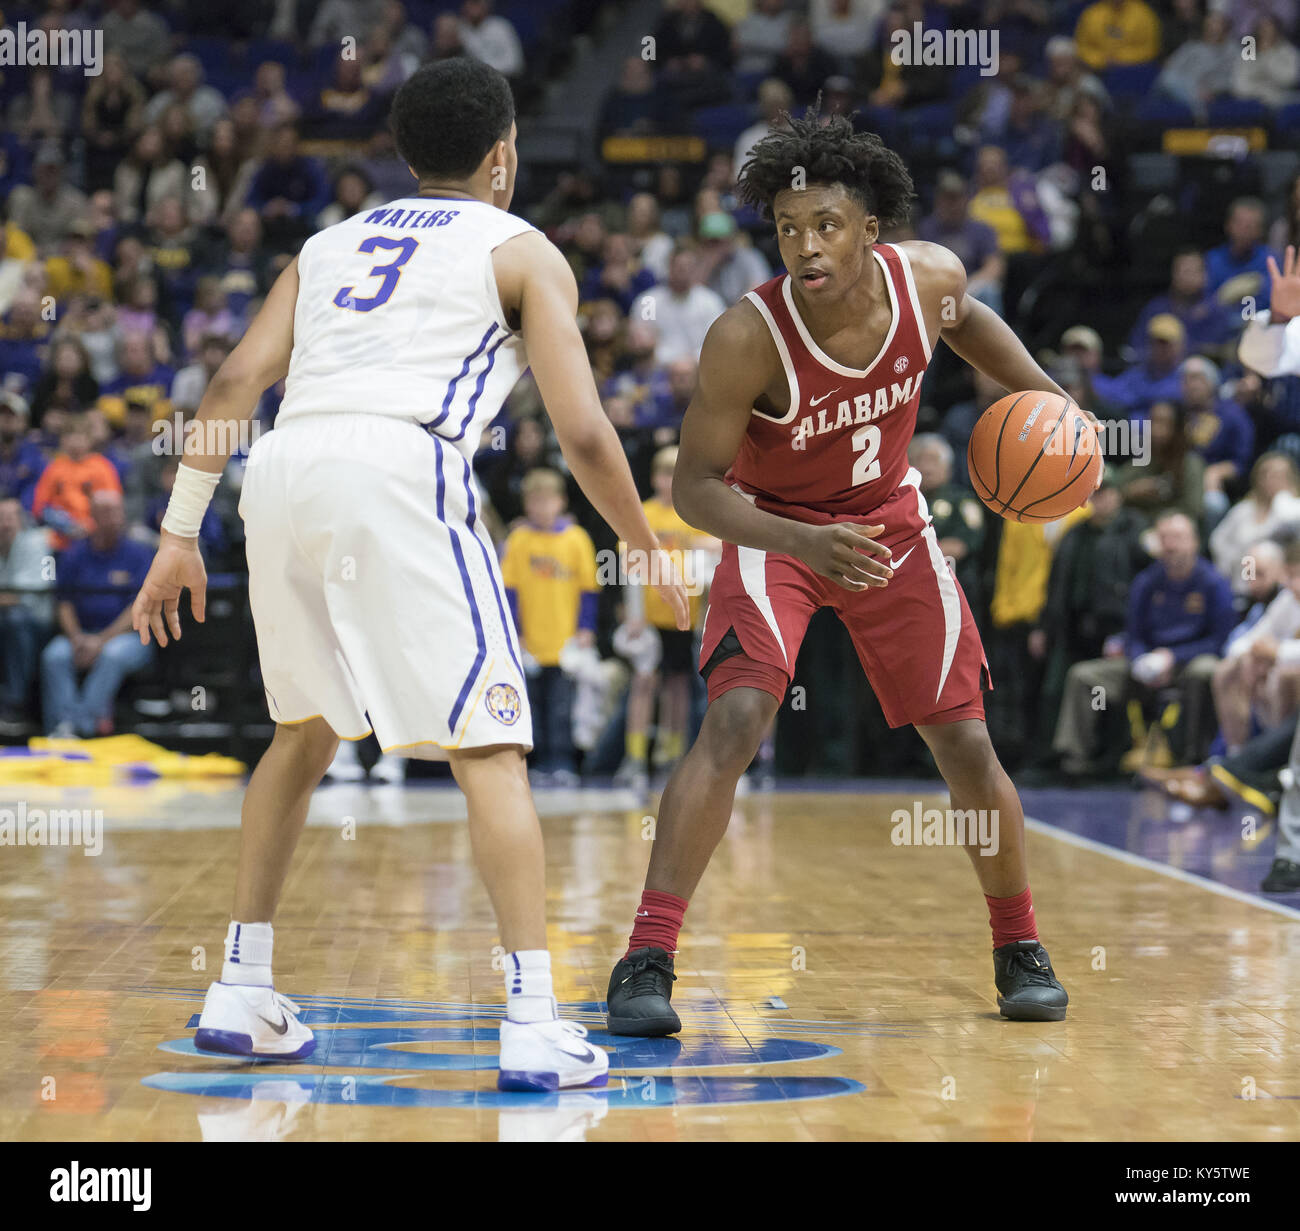 January 13, 2018 - January 13, 2018- Baton Rouge, LA, U.S- Alabama guard COLLIN SEXTON (2) looks to make a play in the second half at the Pete Maravich Assembly Center. Credit: Jerome Hicks/ZUMA Wire/Alamy Live News Stock Photo